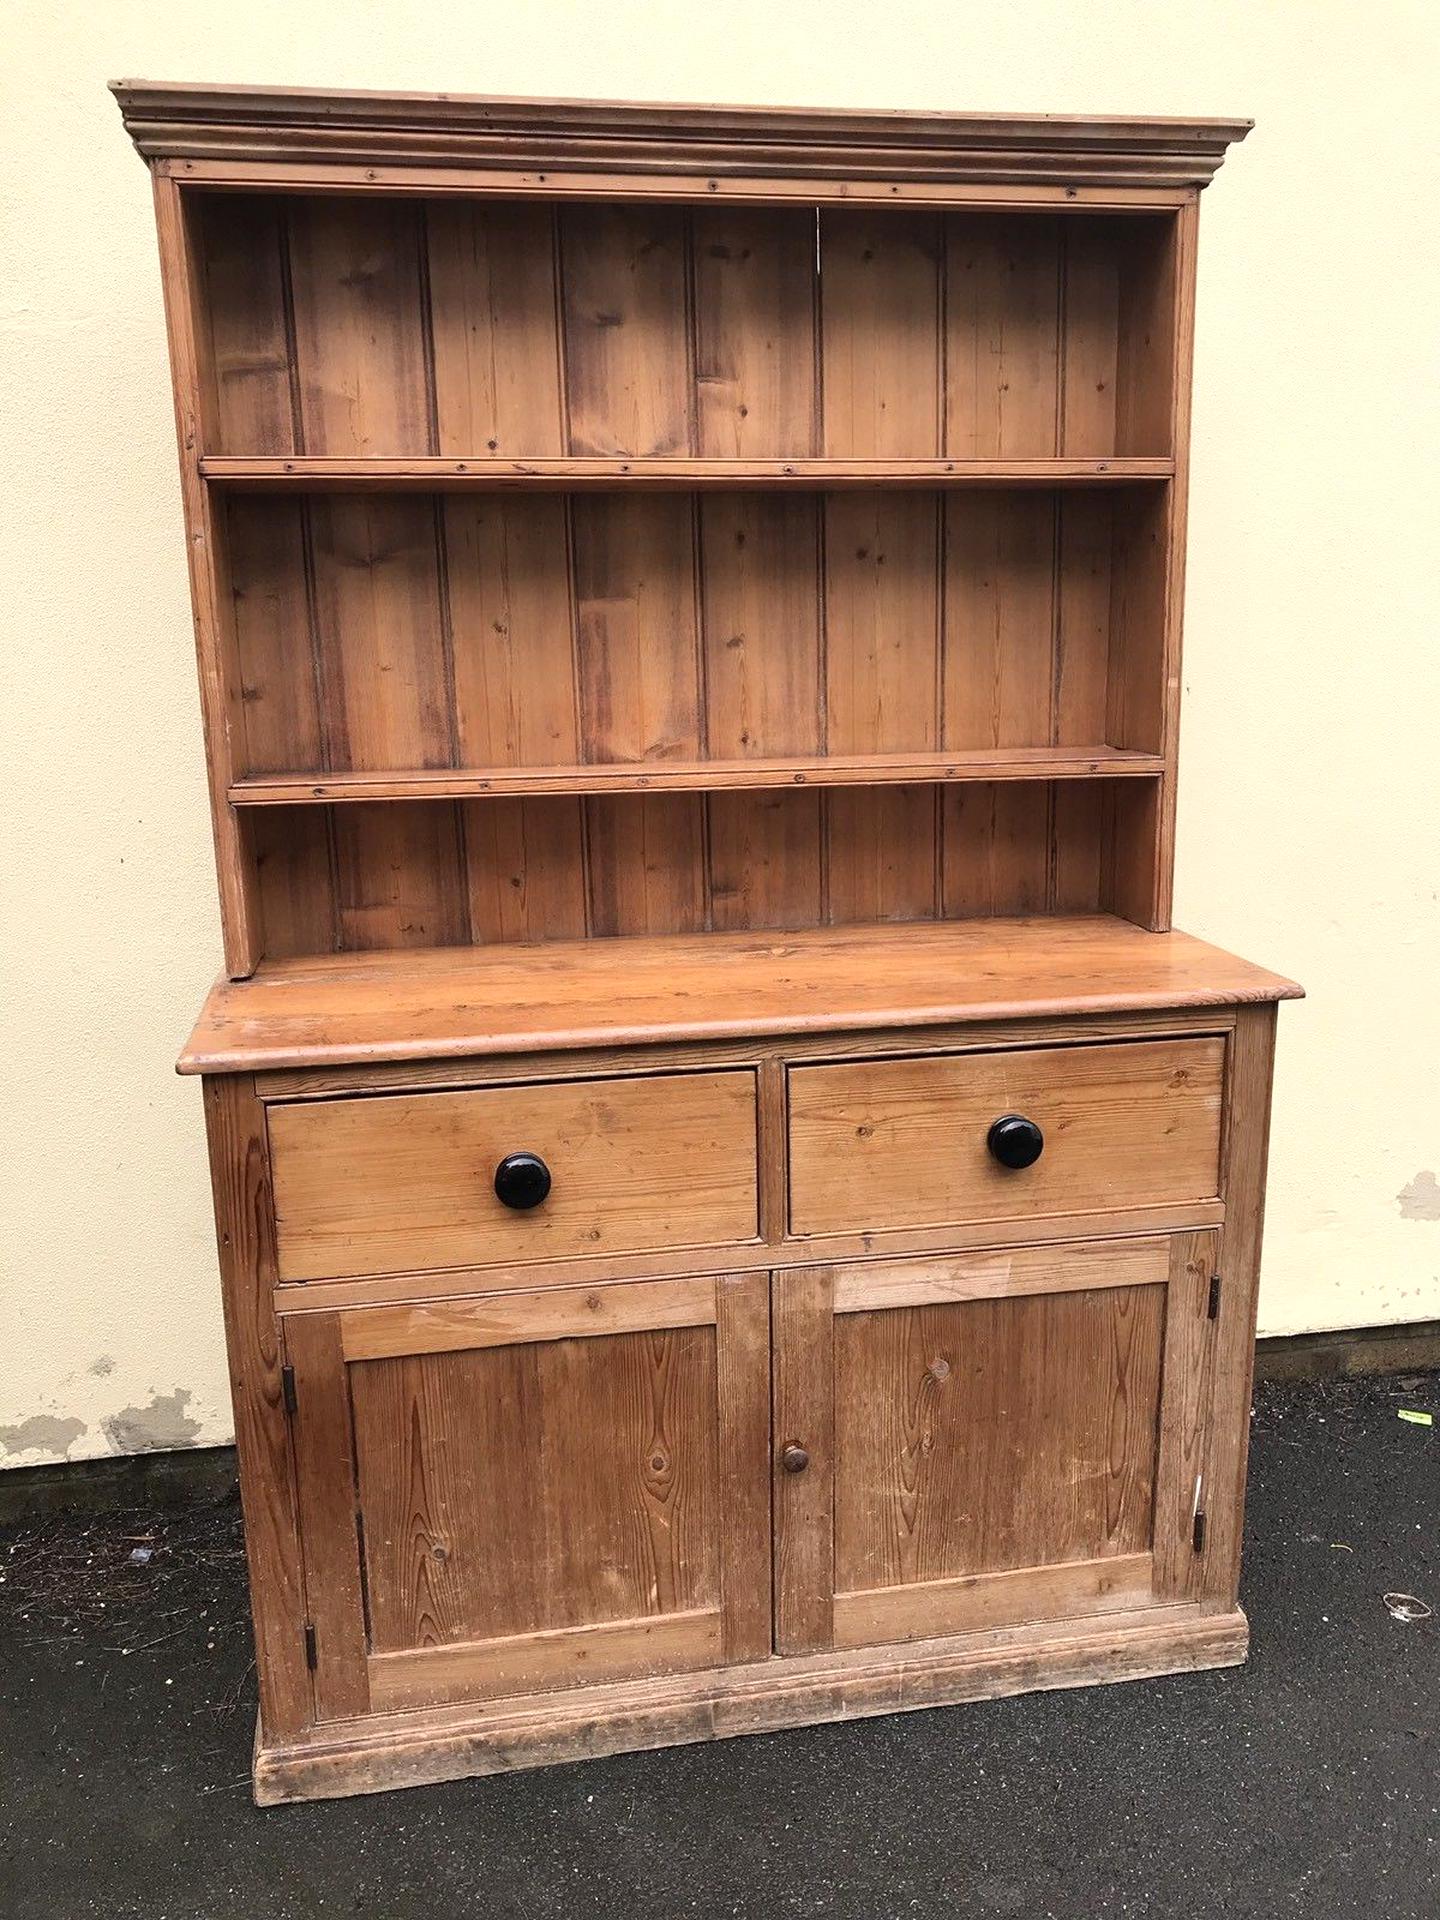 Victorian Pine Dresser for sale in UK | View 73 bargains